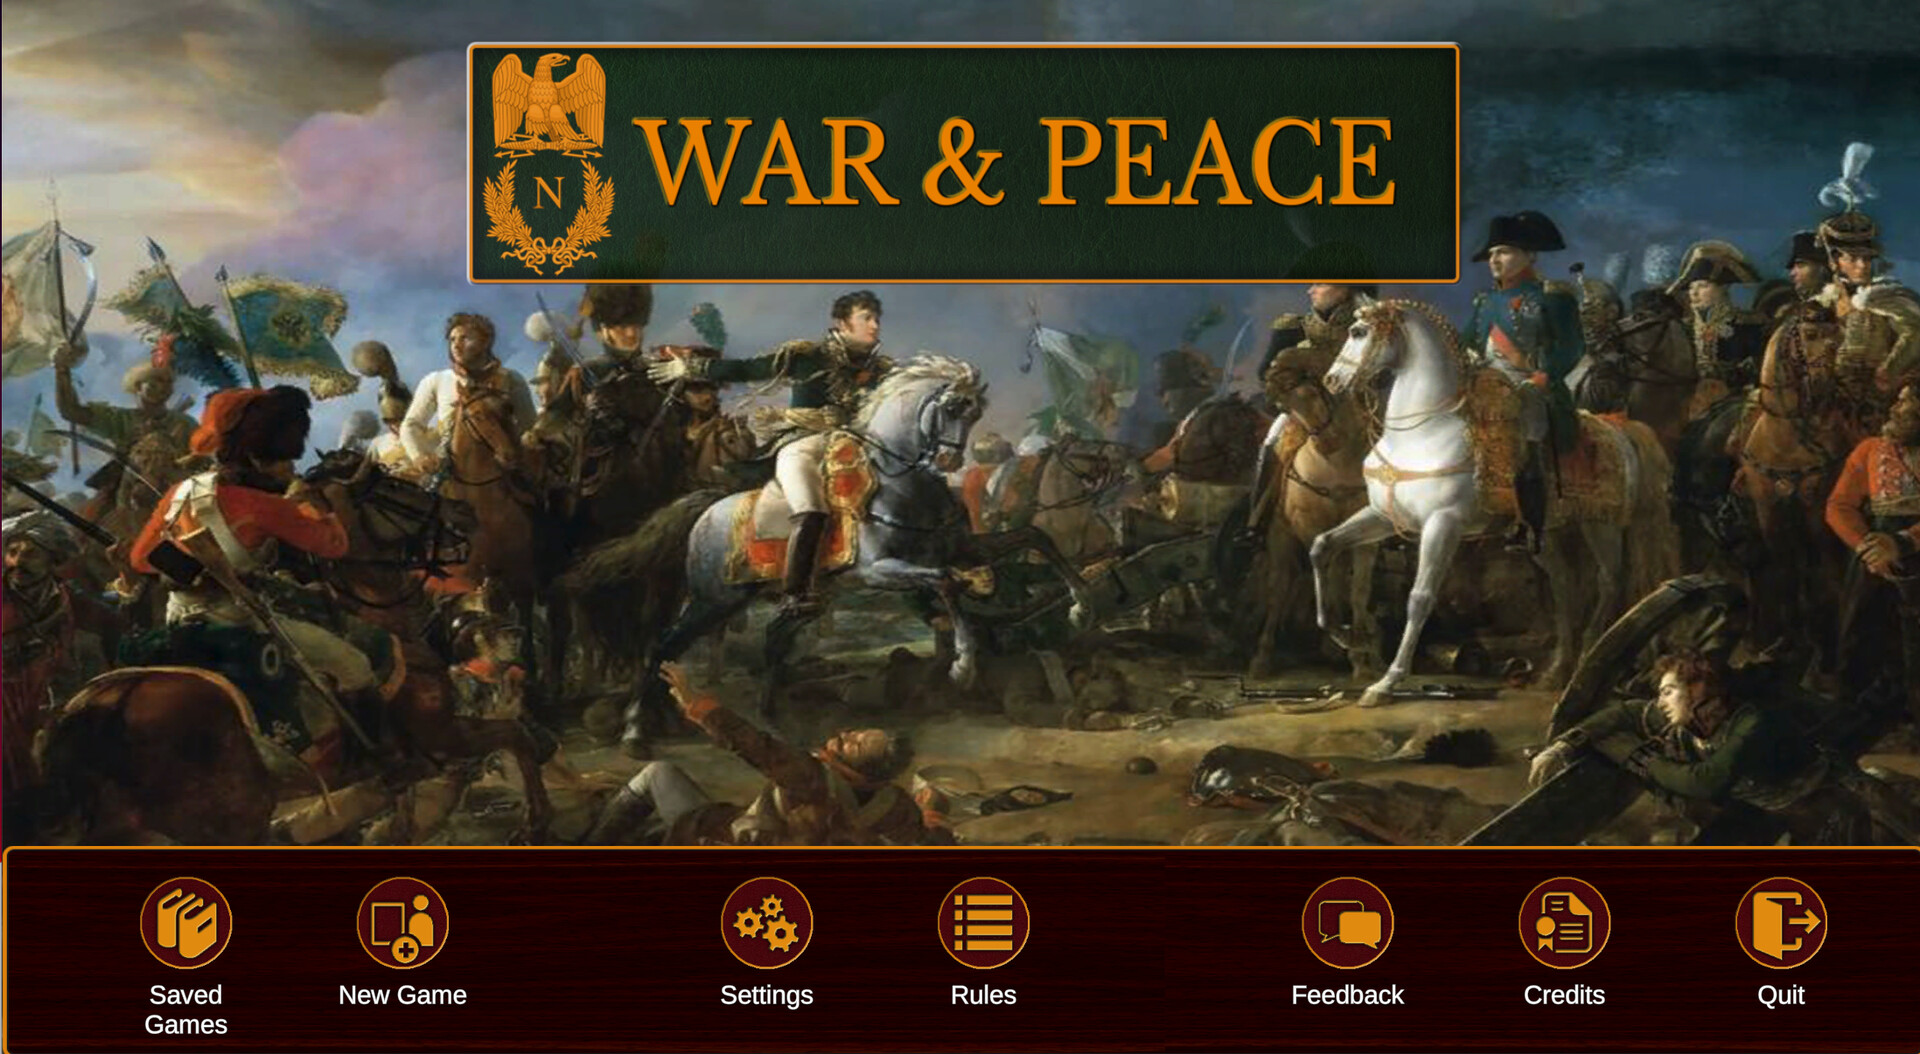 The hero art for the digital edition of War and Peace